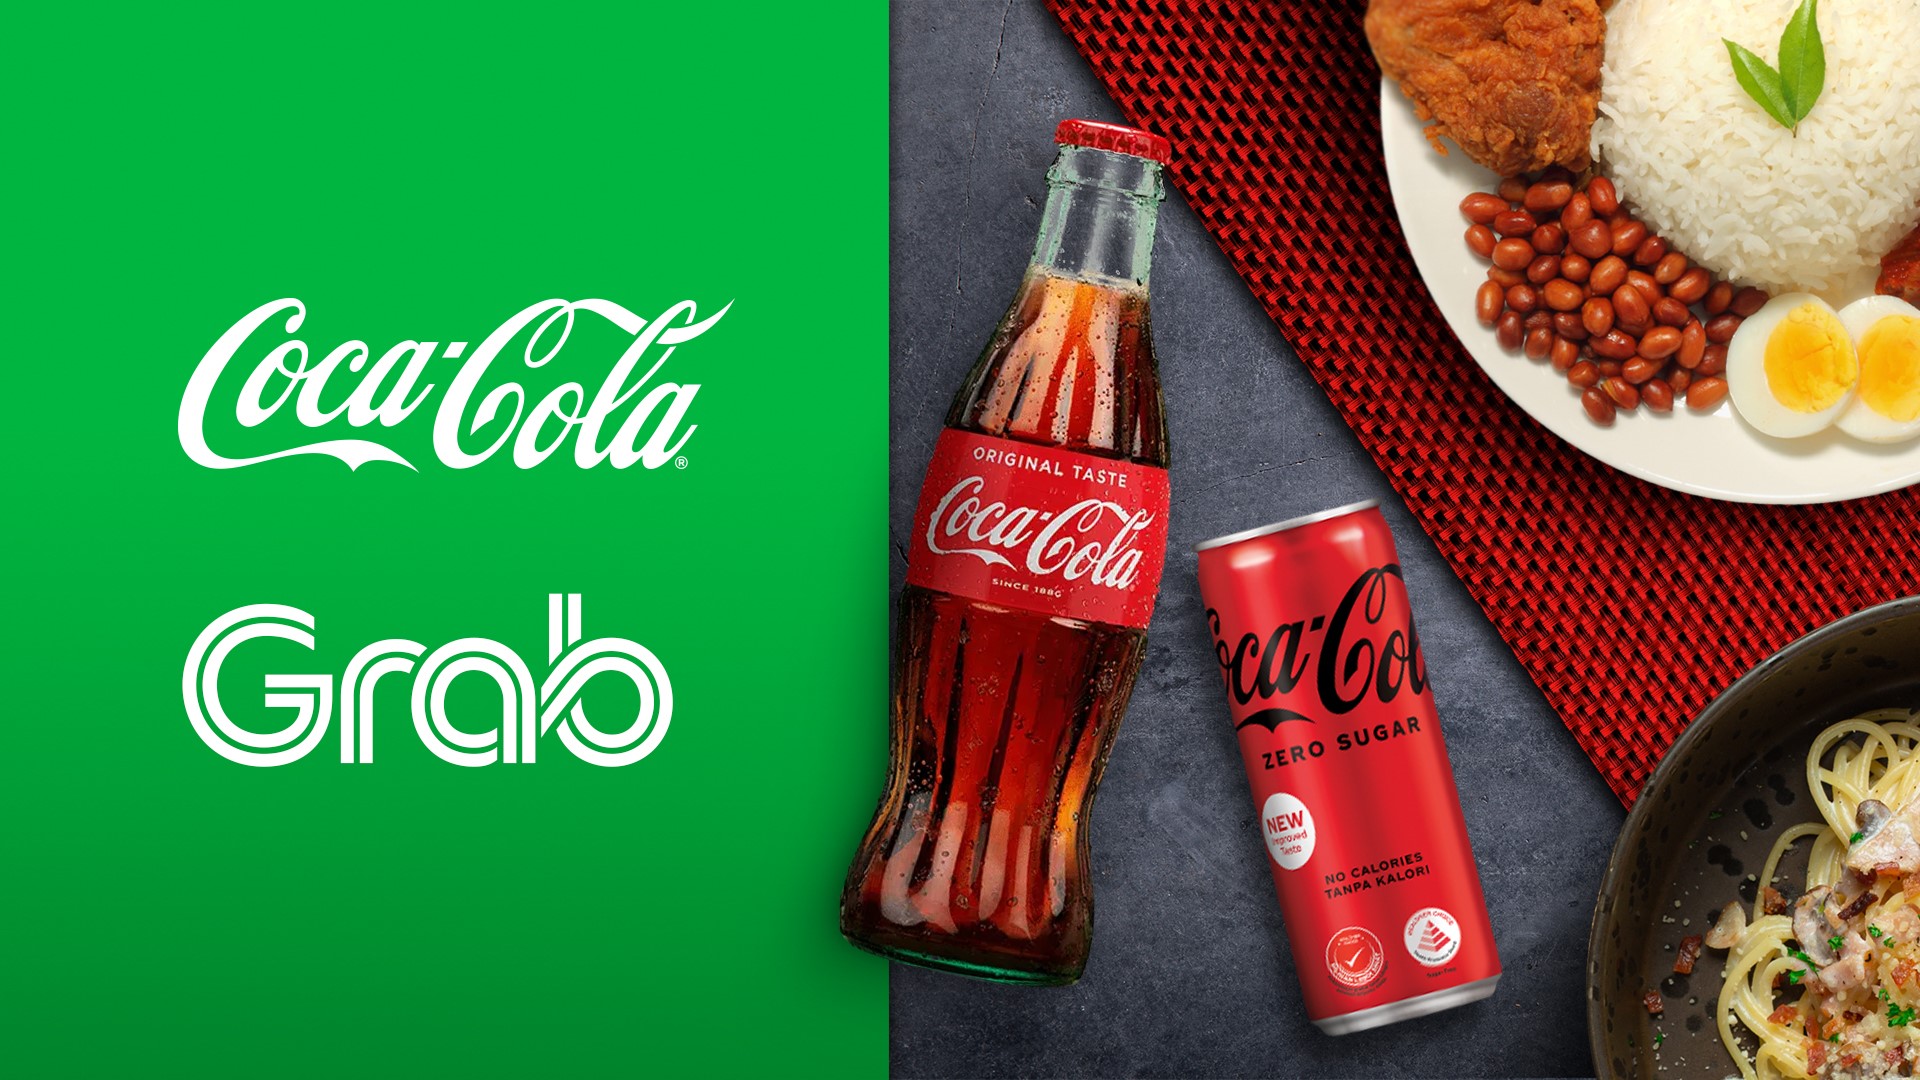 Two plates of food with a bottle and a can of Coca-Cola next to a green background with the logo for Grab and Coca-Cola.